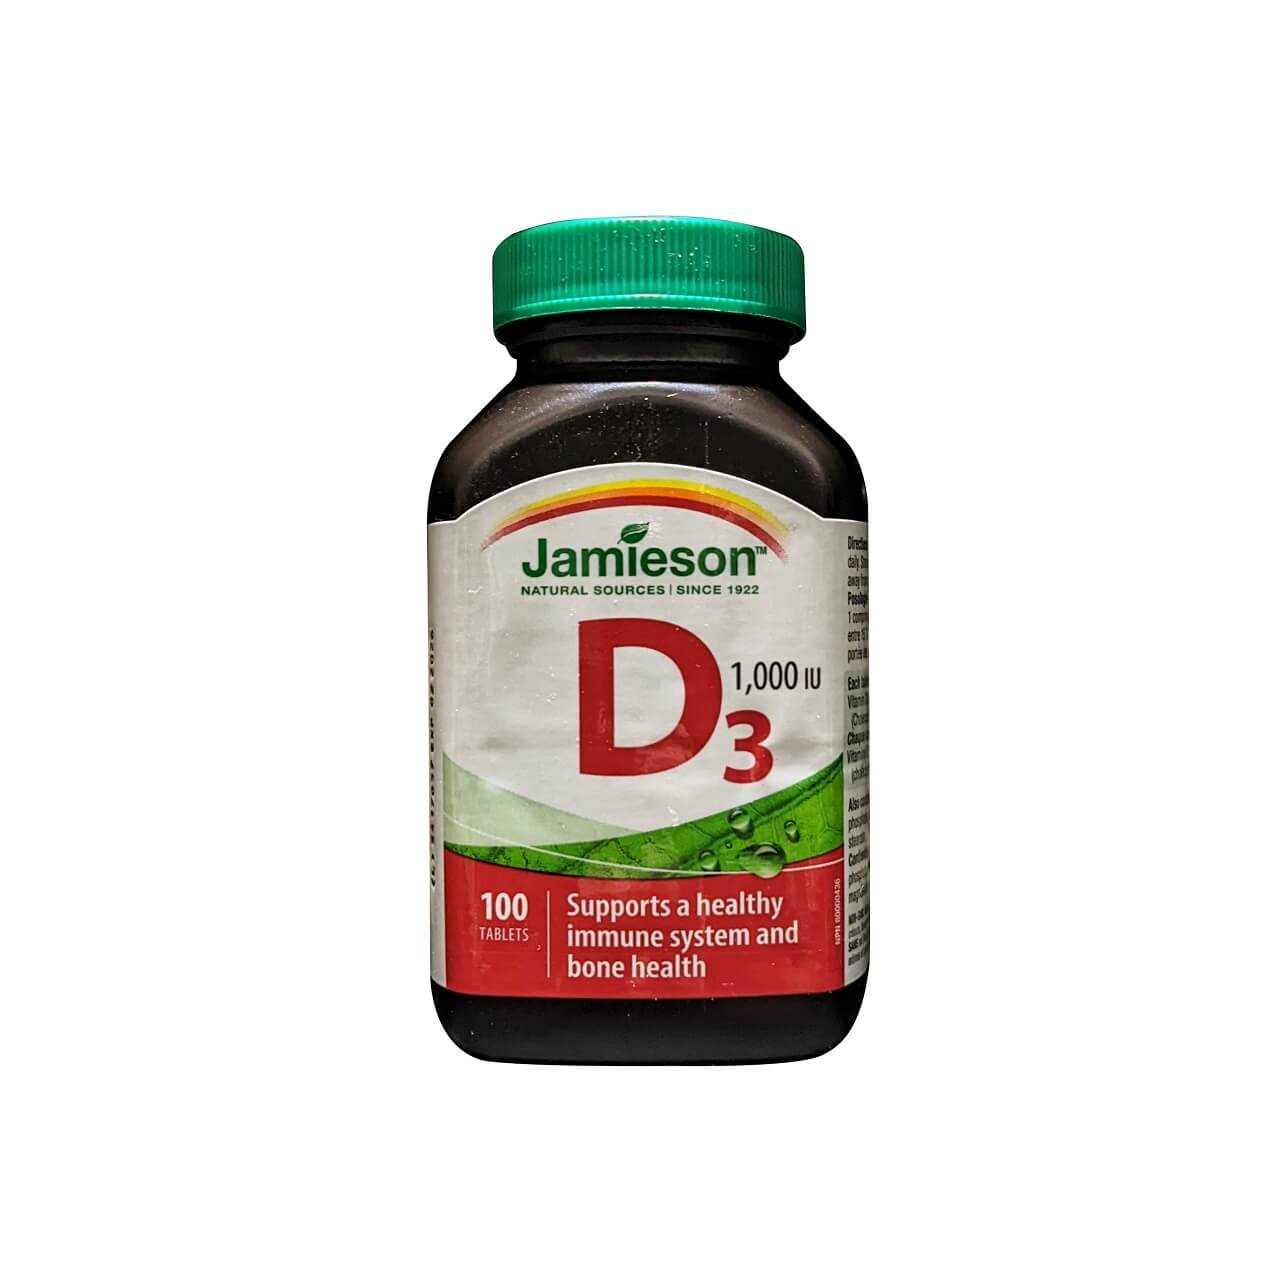 Product label for Jamieson Vitamin D3 1000 IU (100 tablets) in English